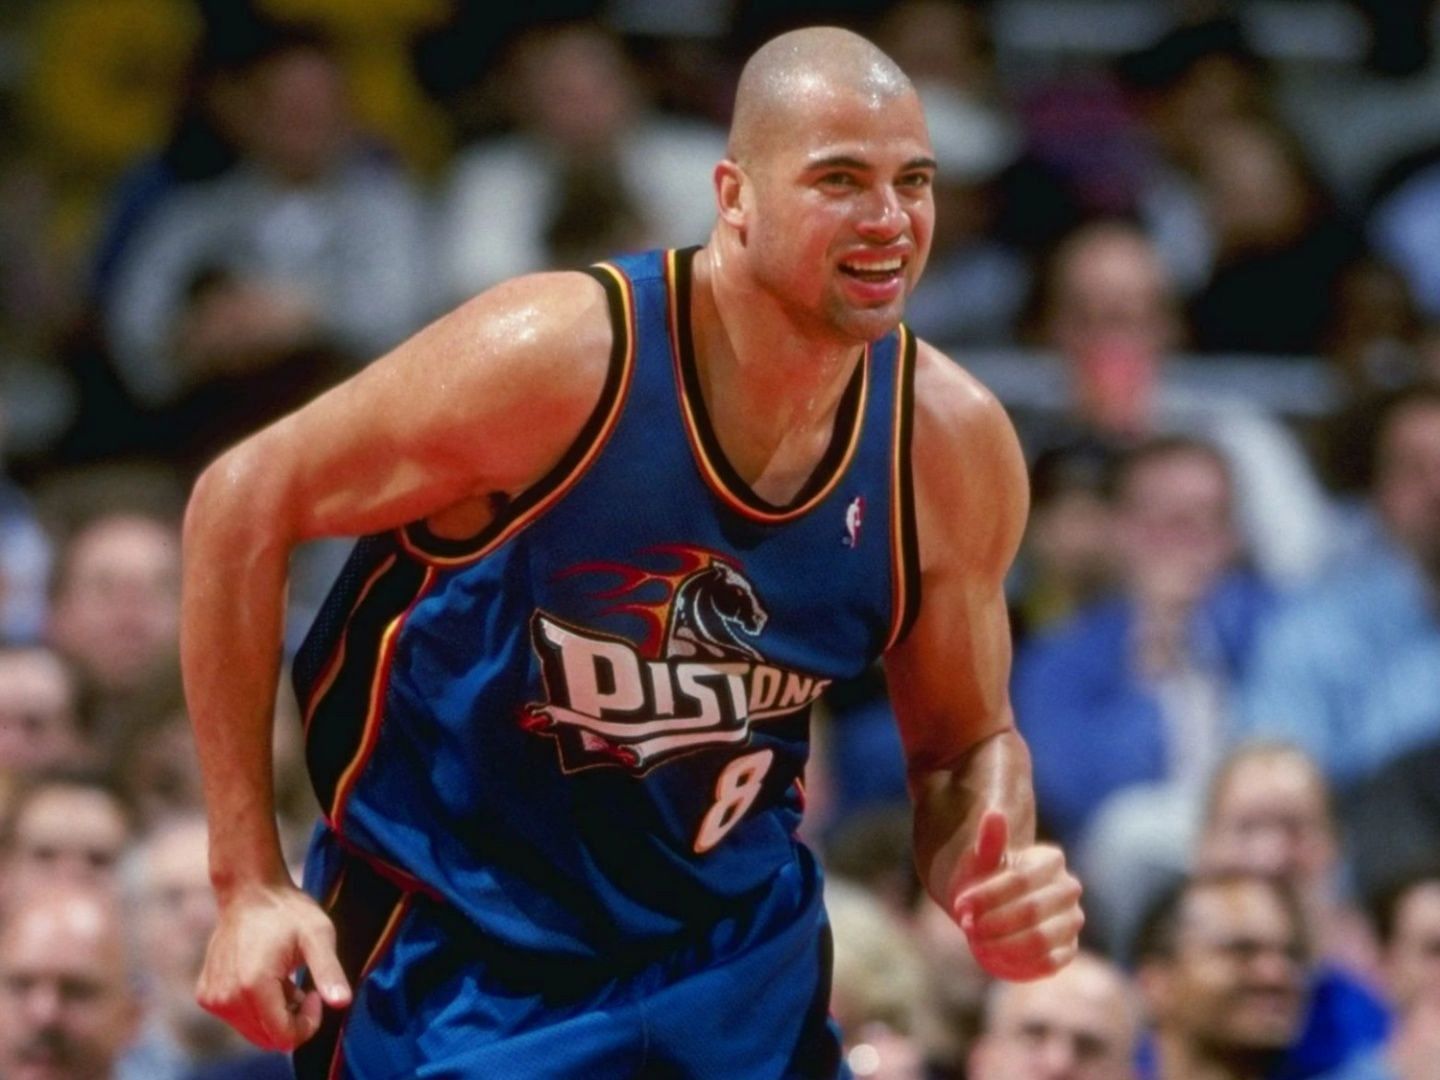 Bison Dele playing for the Detroit Pistons